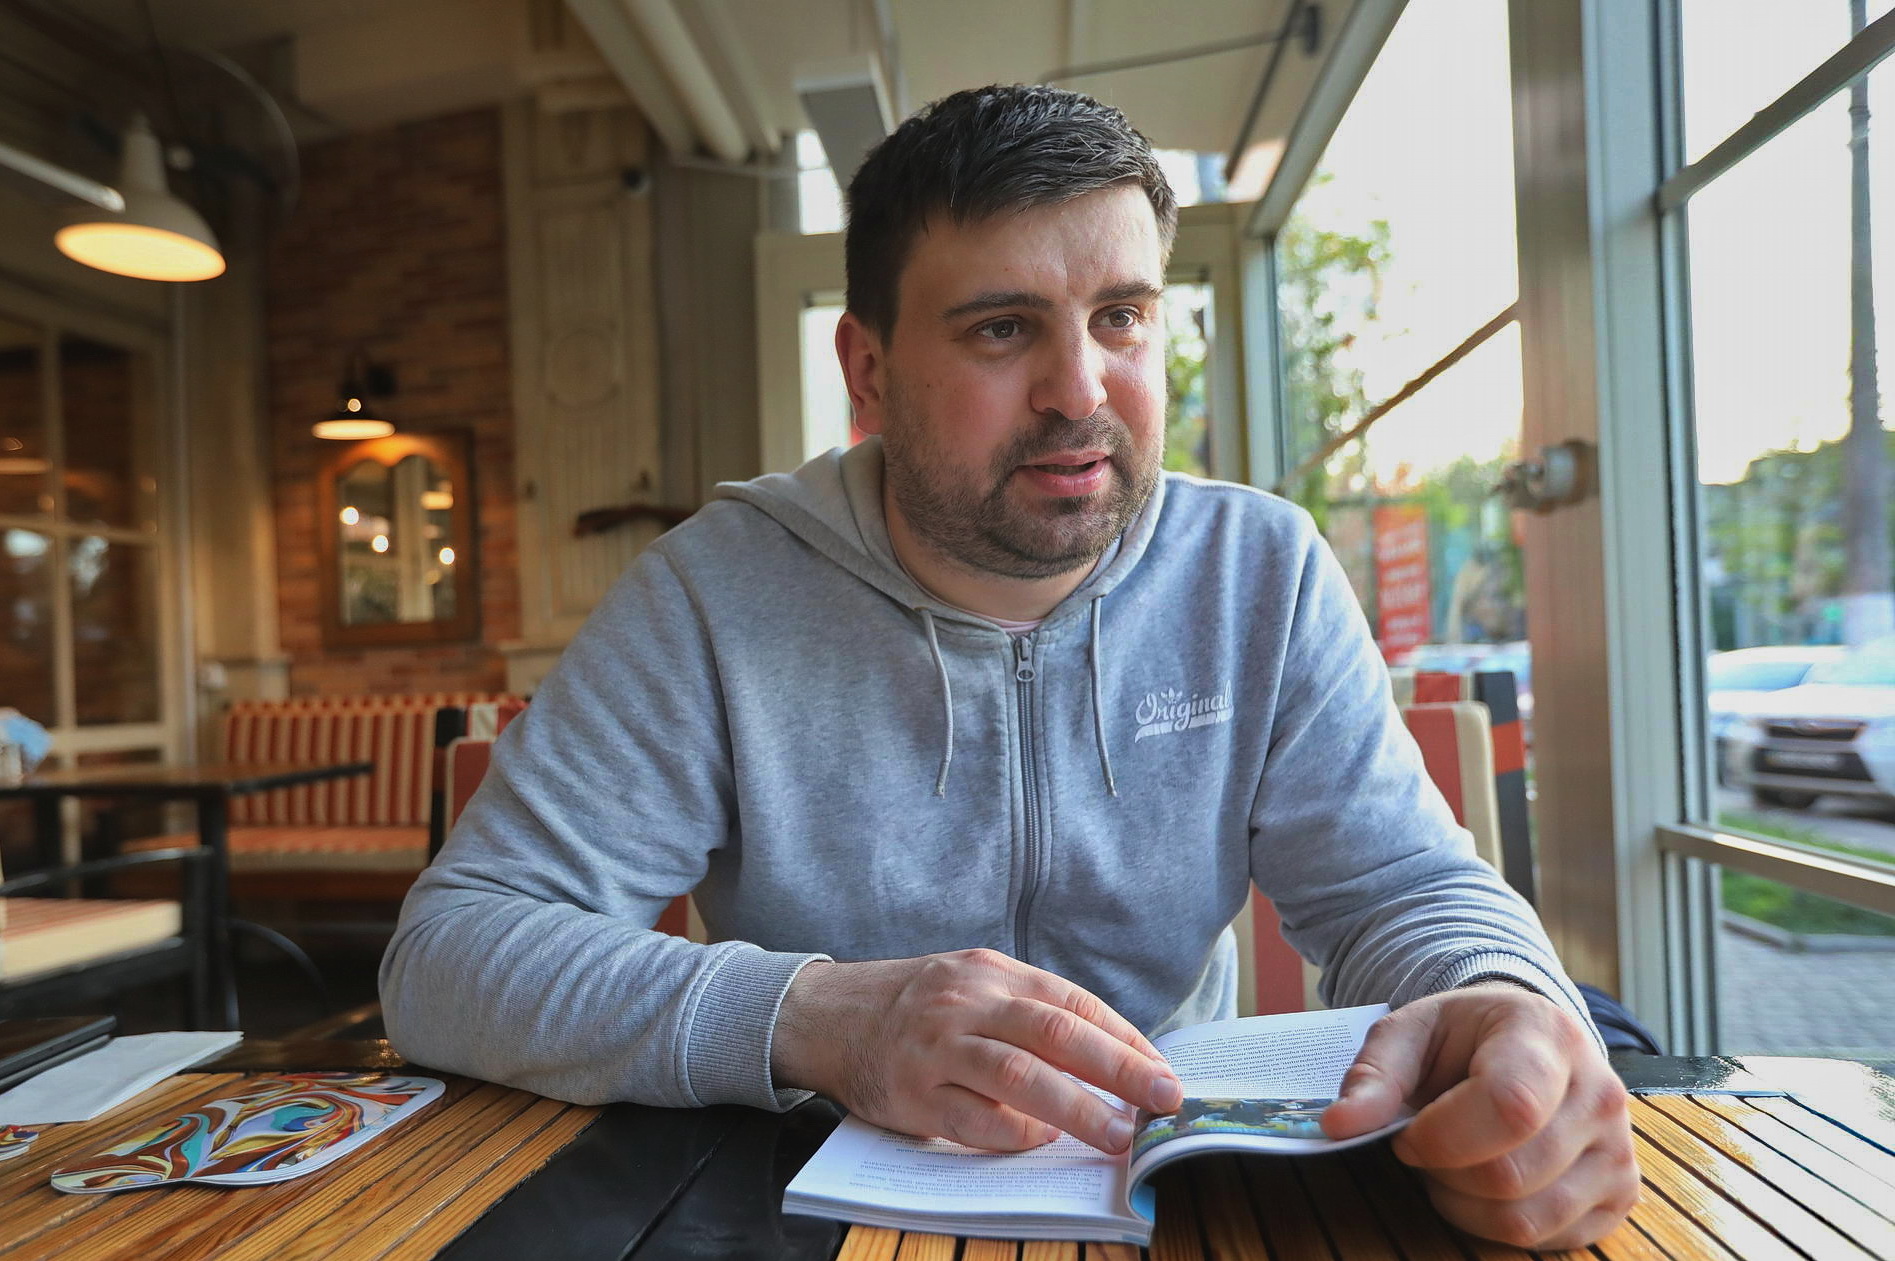 Pavlo Polamarchuk, an activist and contributor to the investigation of May 2 Group, talks in a cafe in Odesa on May 9, 2019. The experts of May 2 Group gave answers to many questions about the Odesa tragedy on May 2, 2014.